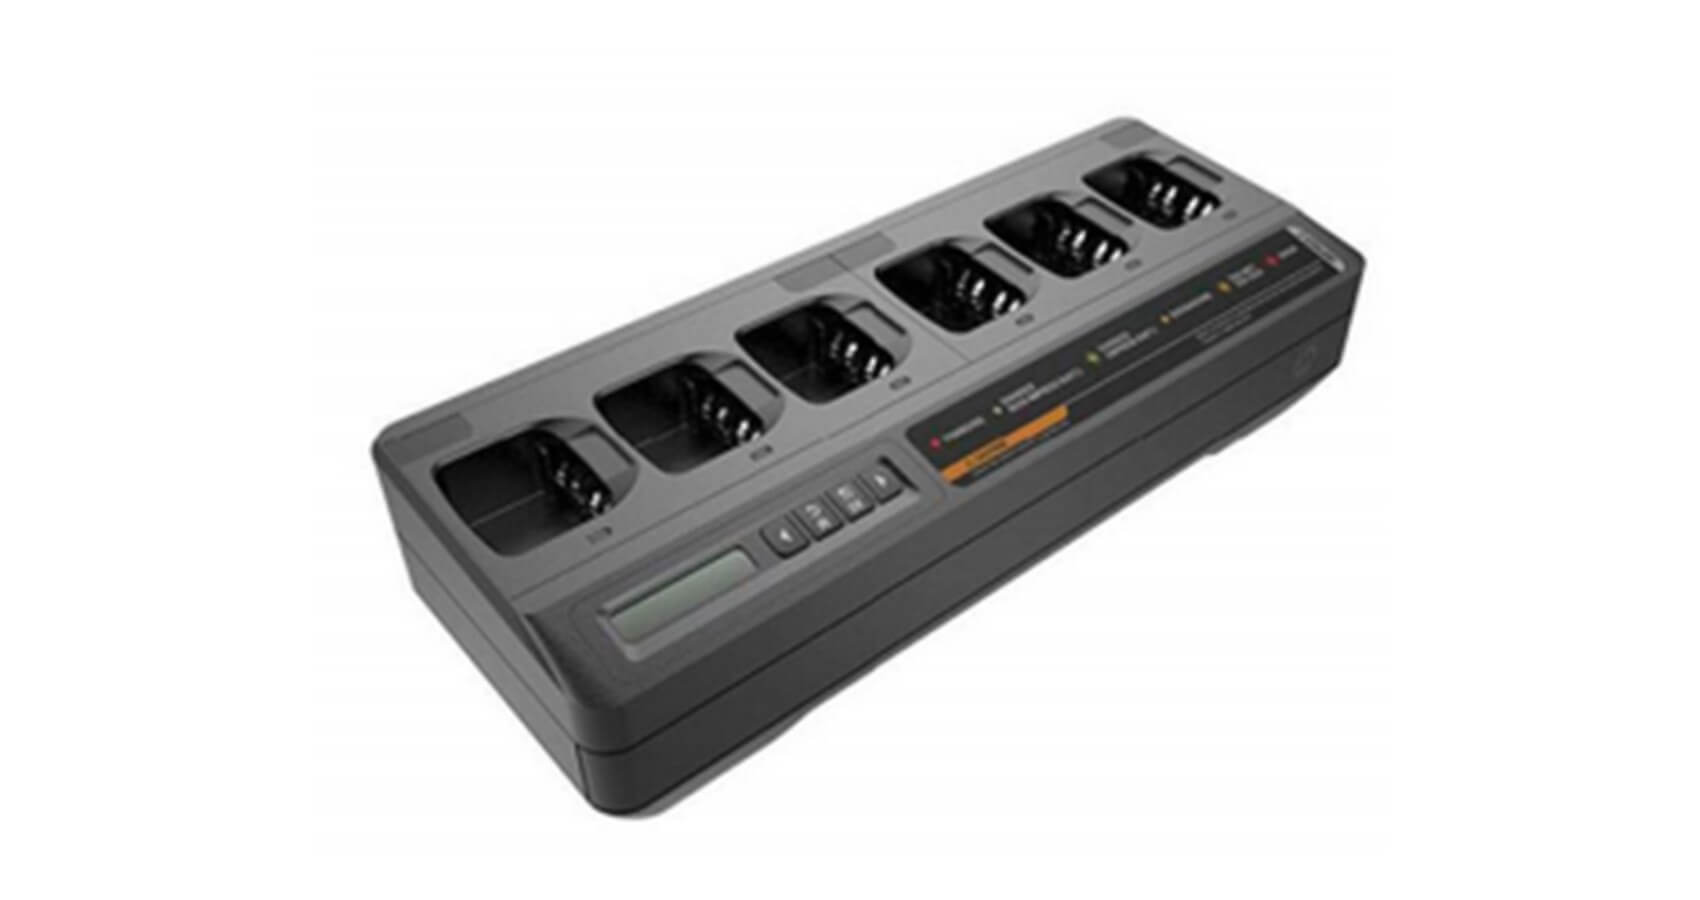 6-Way Multi-Unit Motorola Charger for radio or battery